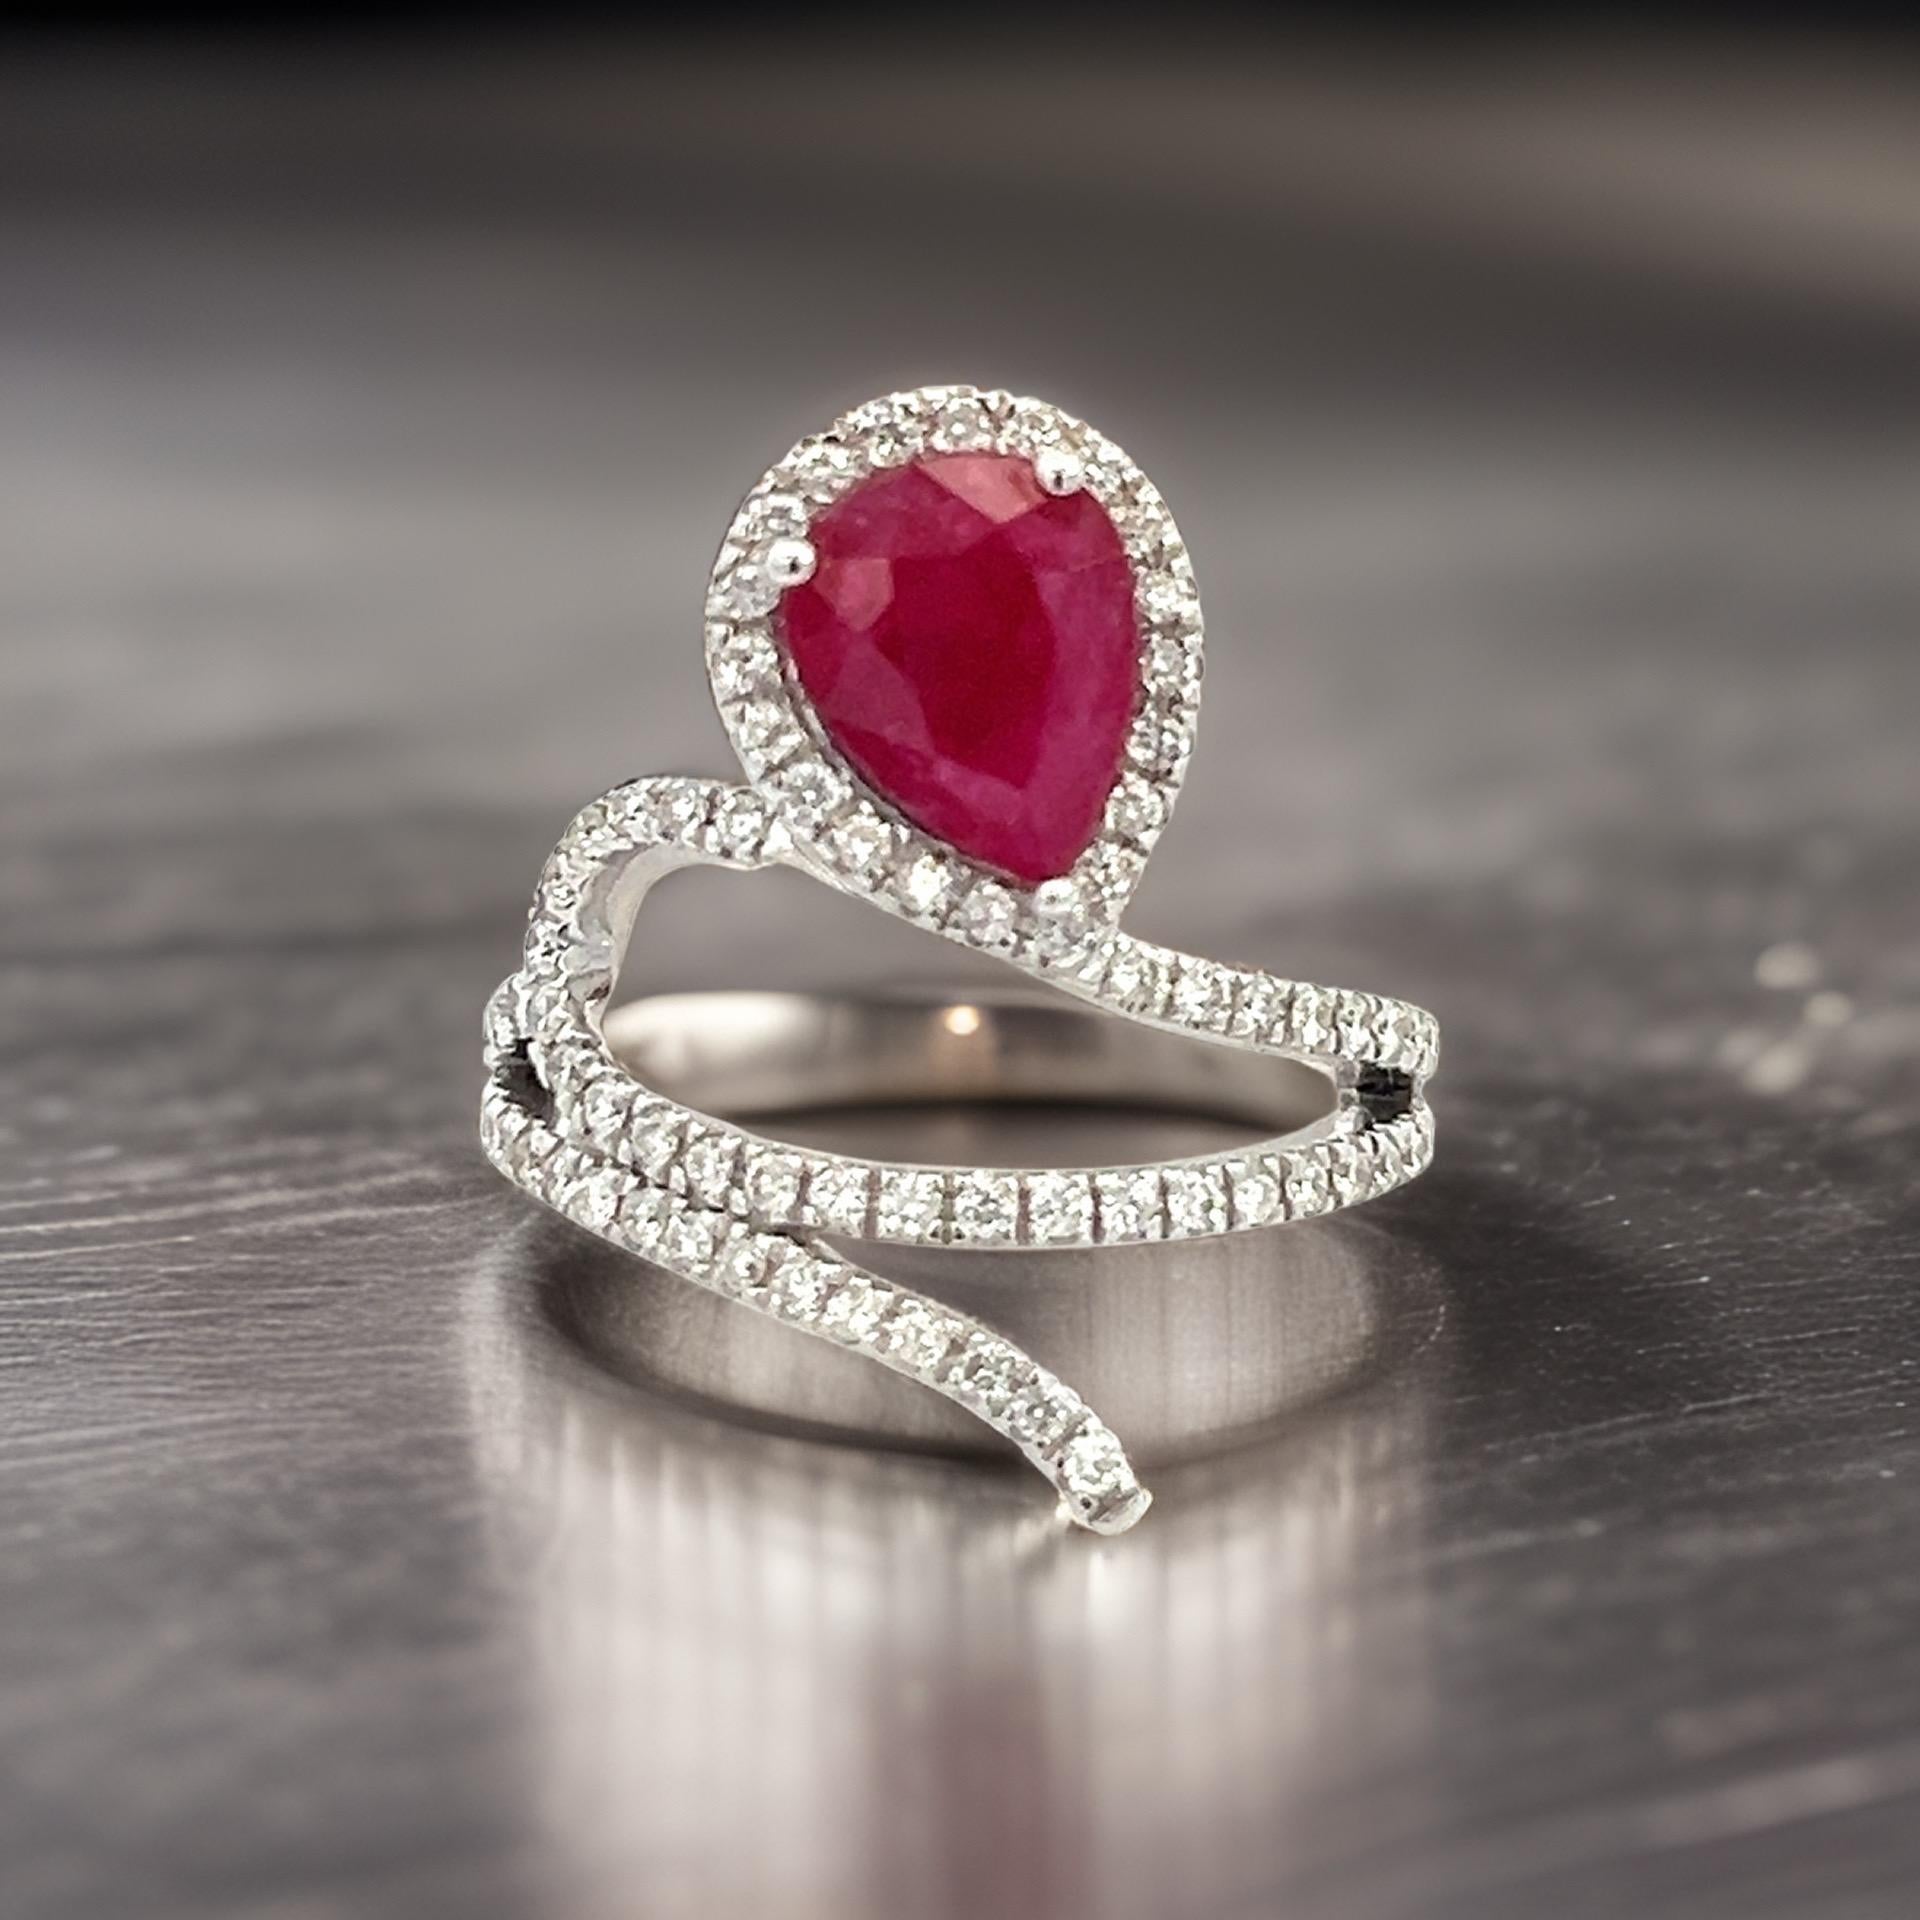 Natural Ruby Diamond Ring 6.75 14k W Gold 2.32 TCW Certified For Sale 10